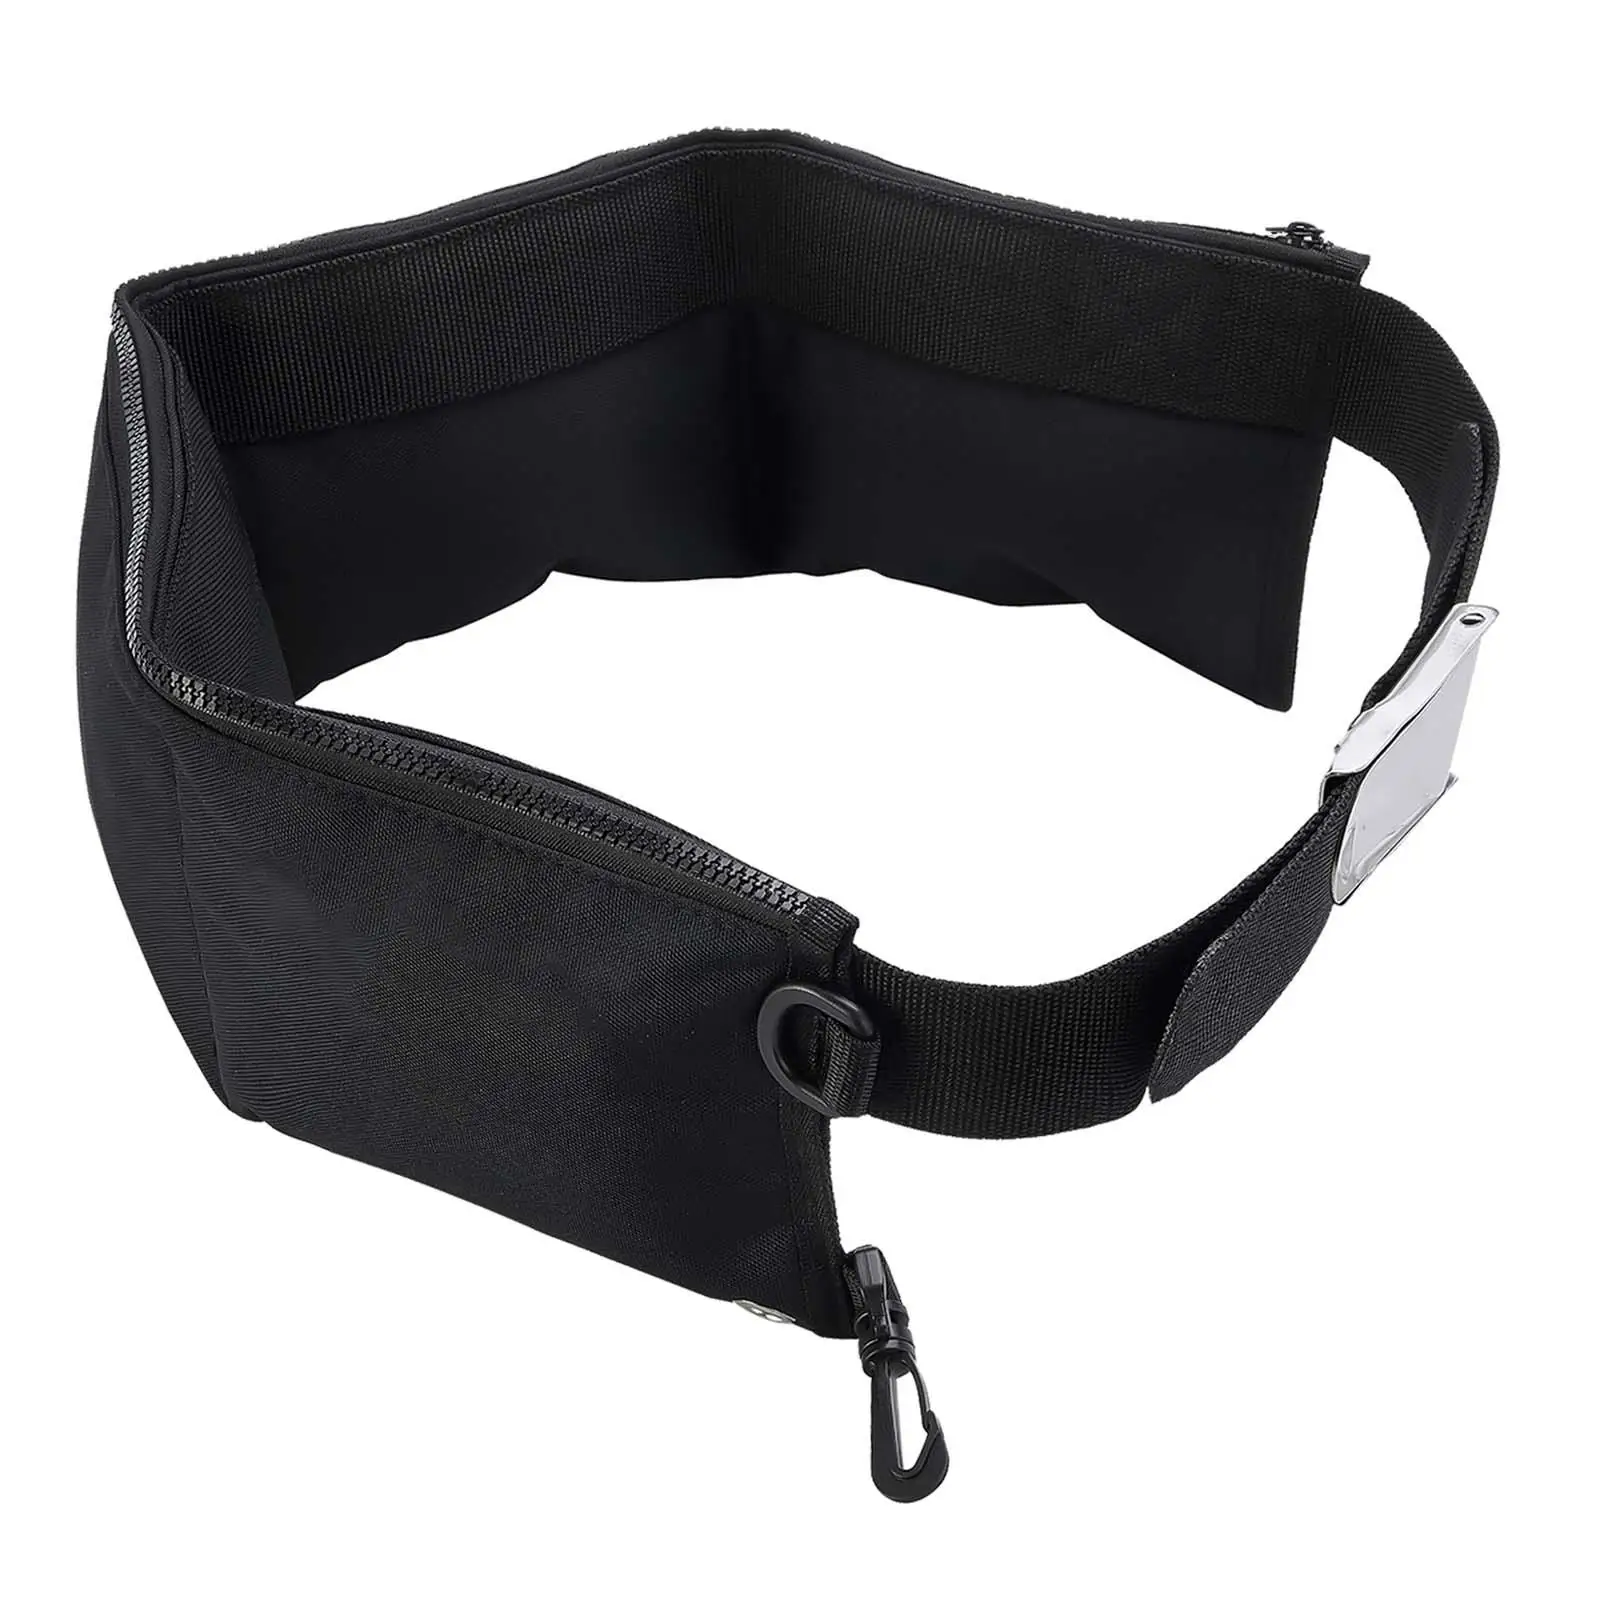 Snorkeling Webbing Weight Pouch Belt Dive Weight Belt Heavy Duty Self Draining Pockets Black Quick Release Buckle with 4 Pocket